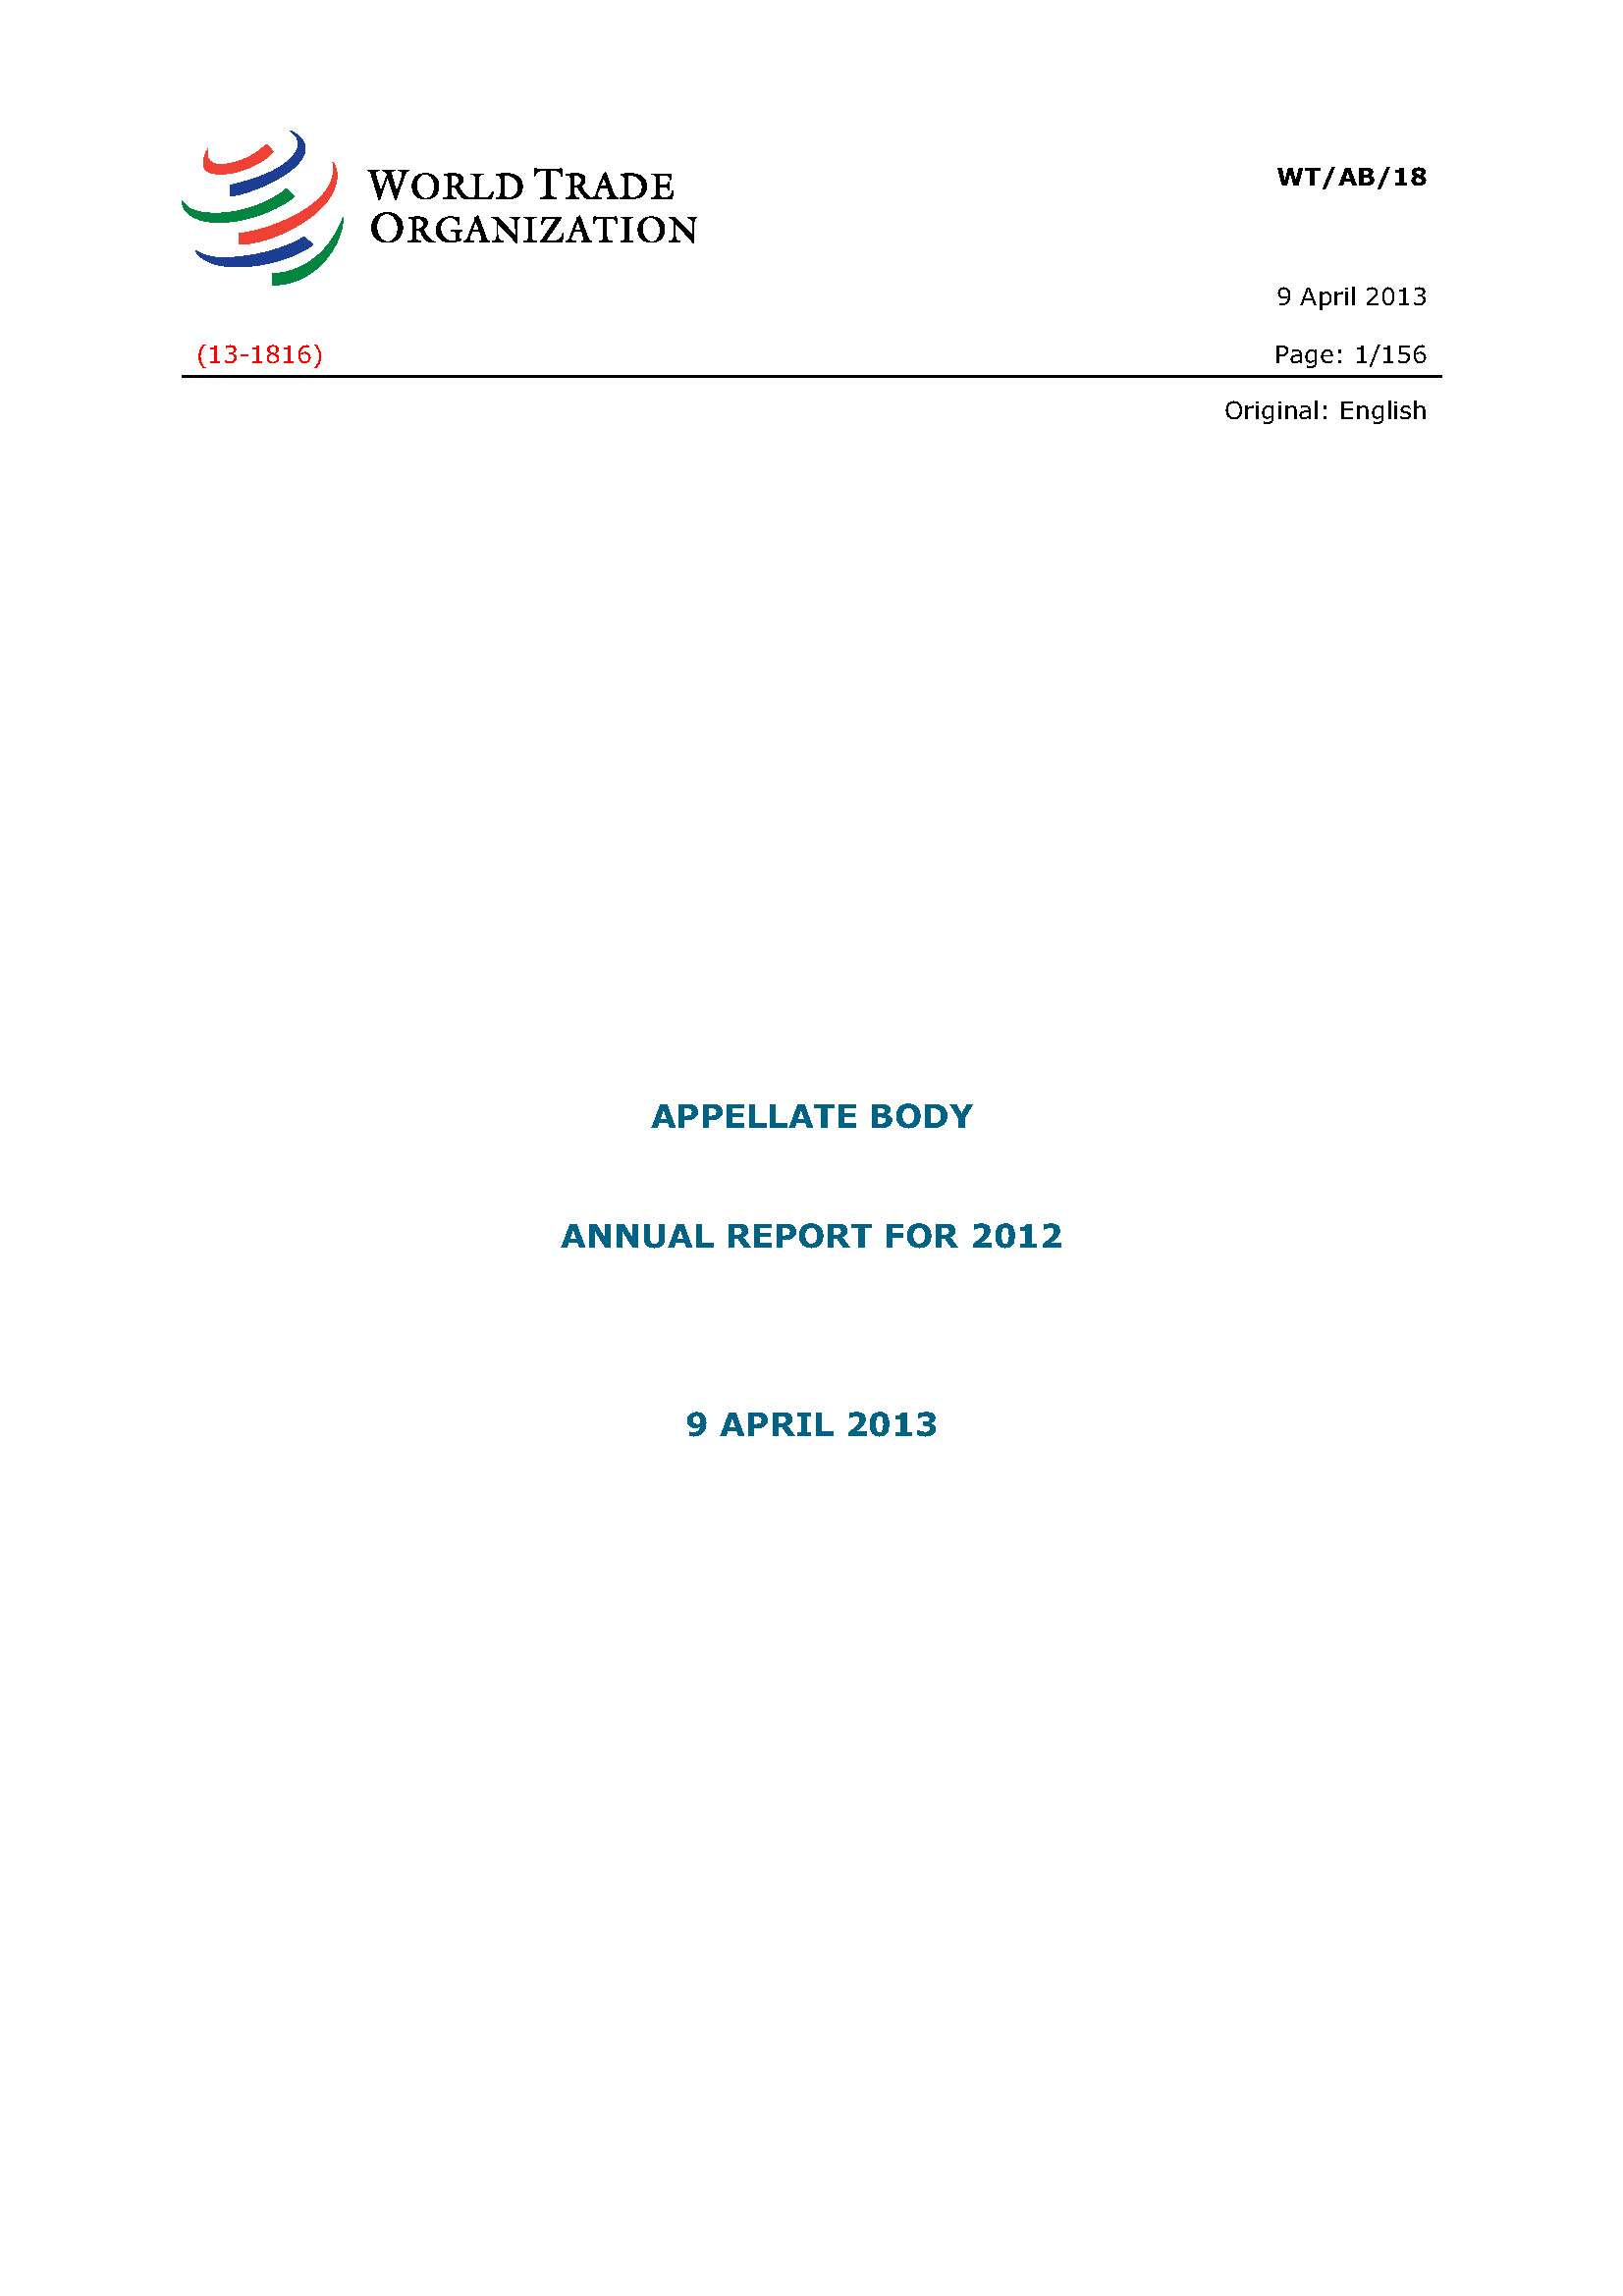 image of Appellate Body annual report for 2012